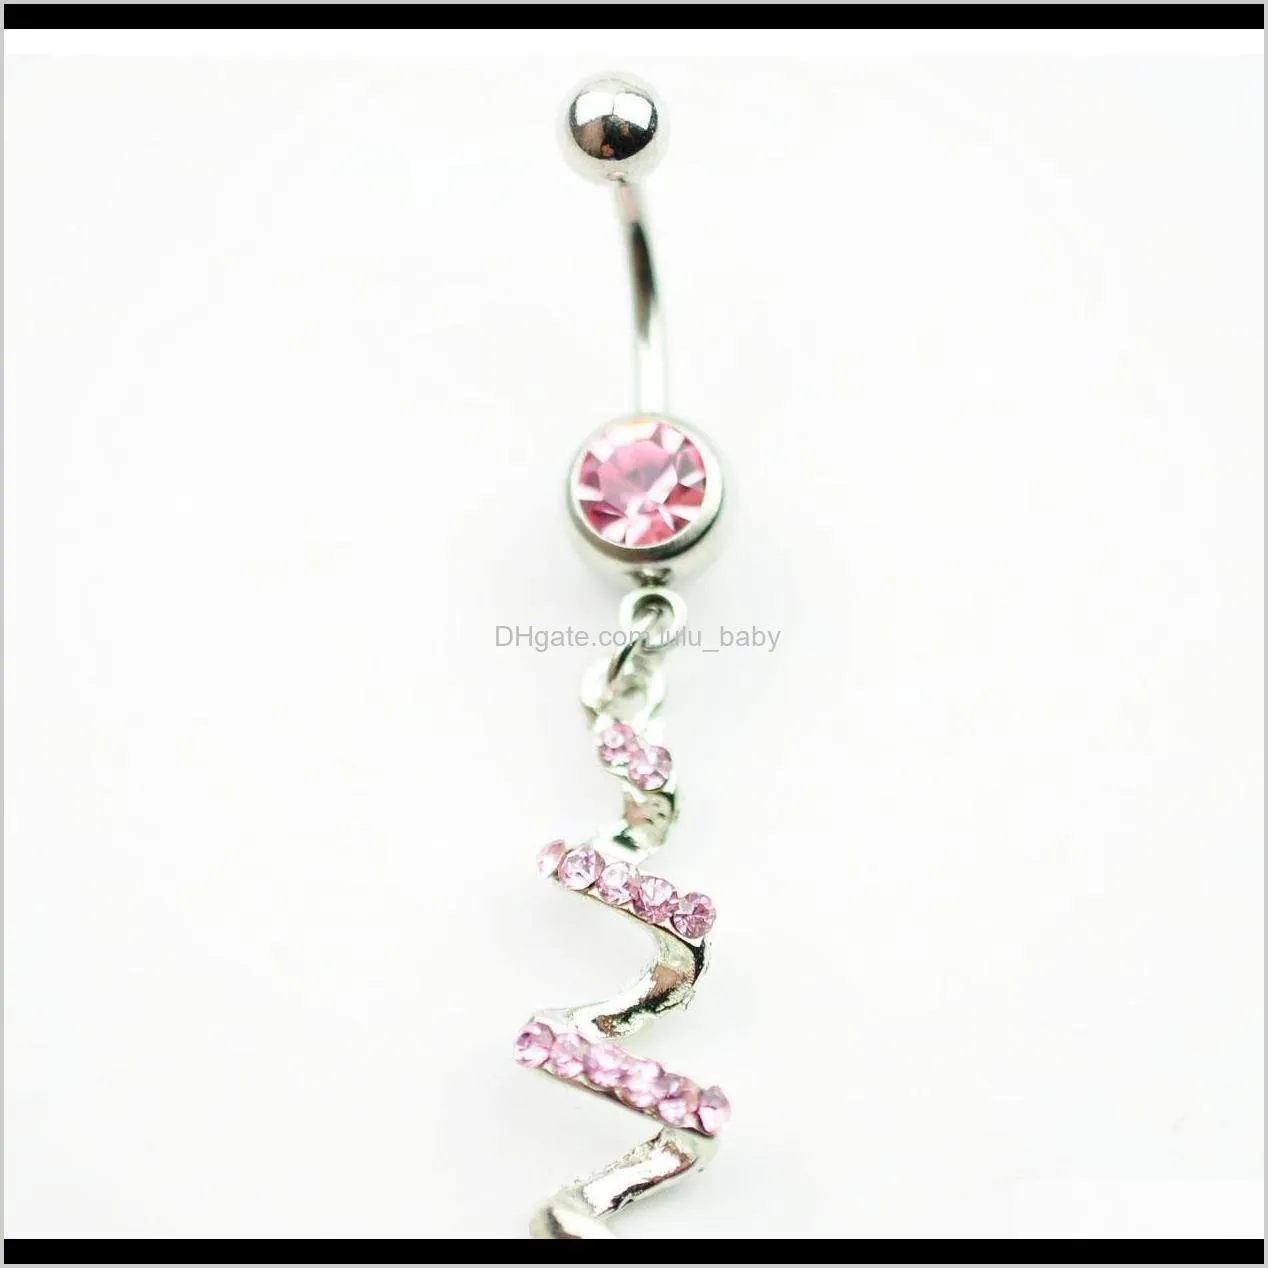 d0013-1 ( 2 ) piercing body jewelry new style navel belly ring clear & pink colors stone drop shipping i9ioo